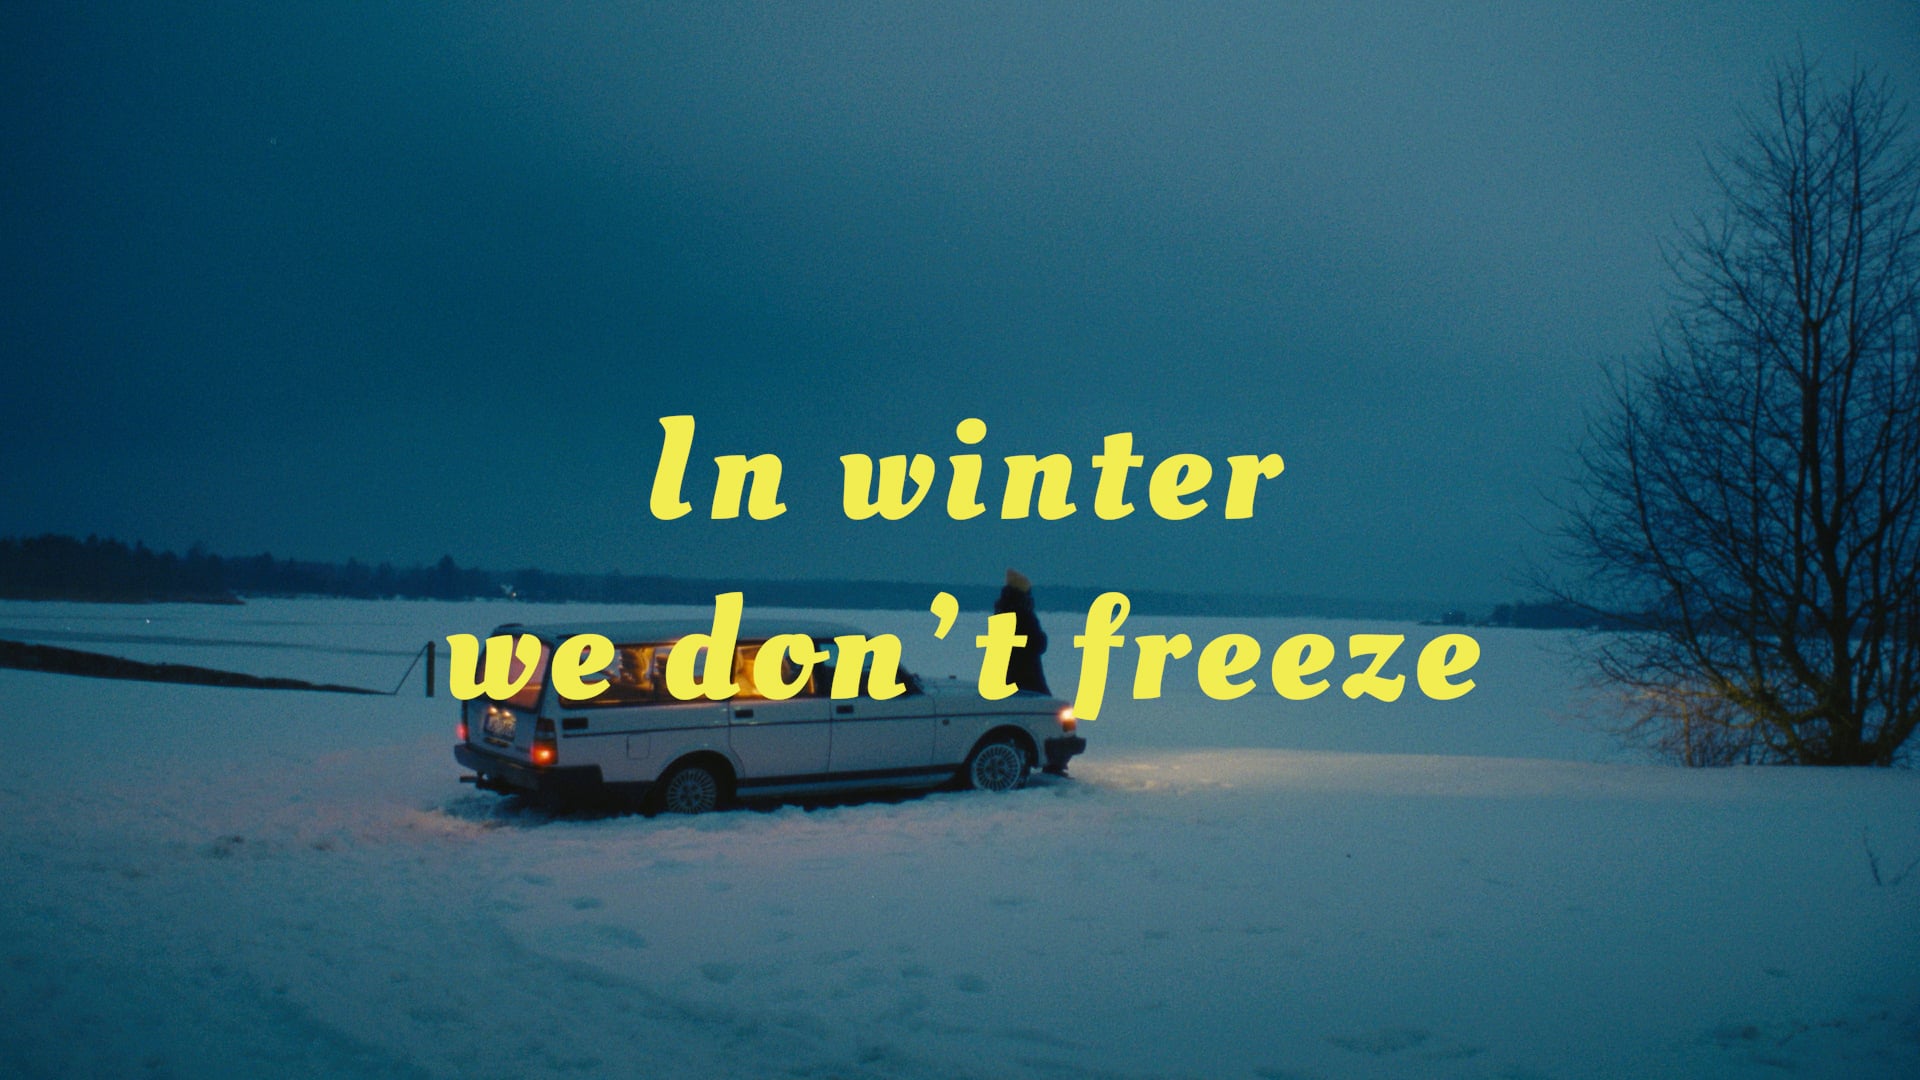 IN WINTER WE DON'T FREEZE